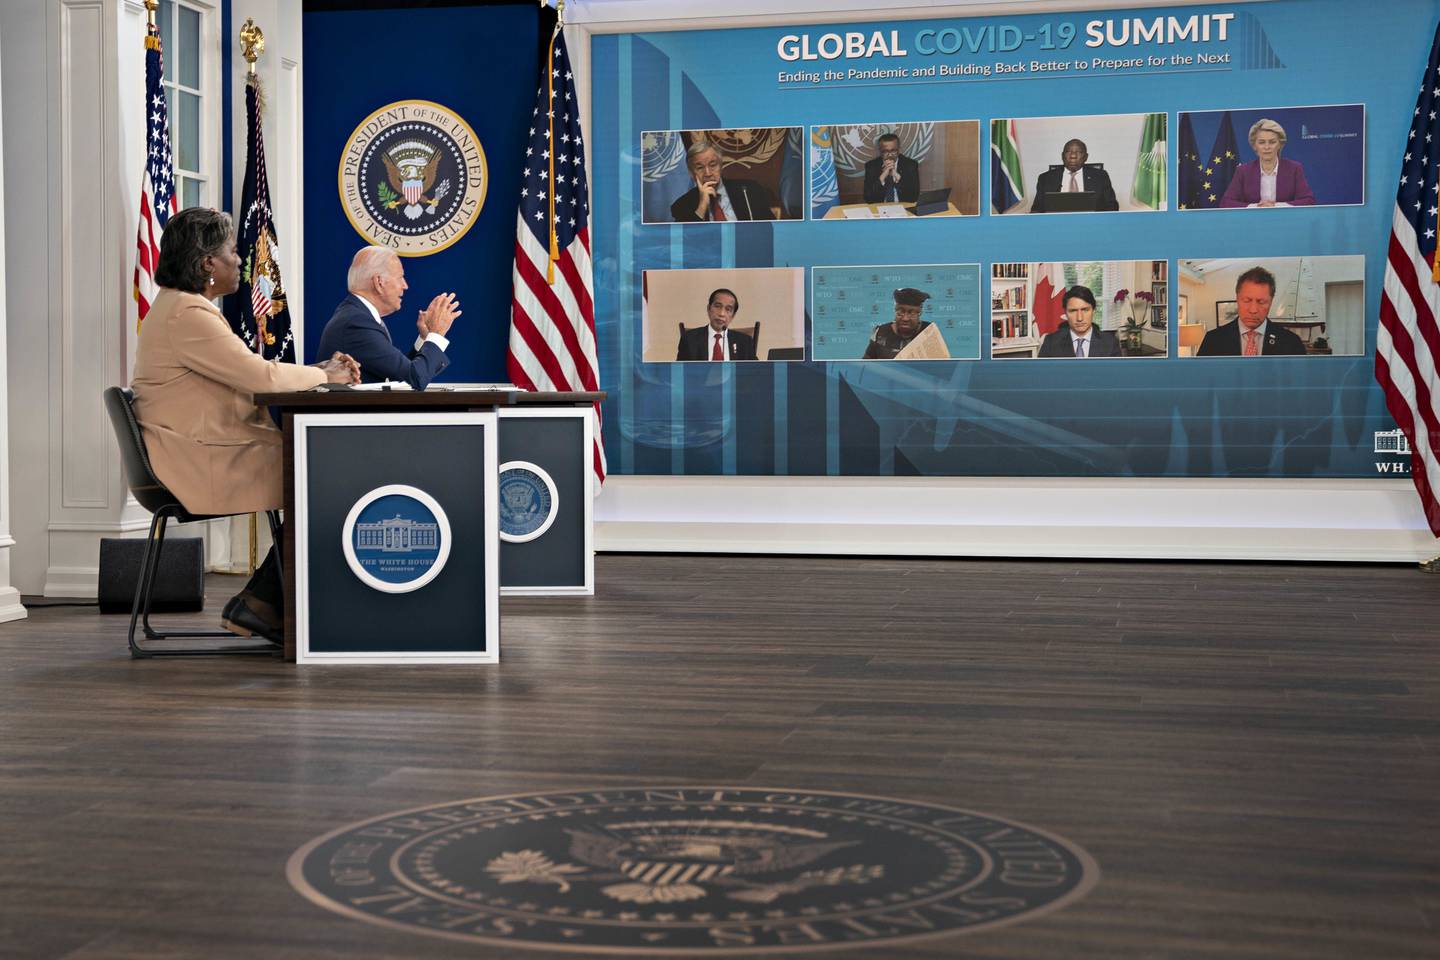 U.S. President Joe Biden, second left, speaks as participants including Linda Thomas-Greenfield, U.S. ambassador to the United Nations (UN), left, listen during a virtual Covid-19 Summit on the sidelines of the United Nations General Assembly in the Eisenhower Executive Office Building in Washington, D.C., U.S., on Wednesday, Sept. 22, 2021. Biden is calling for 70% of the world to be vaccinated by this time next year during the summit that's intended to spur countries, businesses and organizations to set firm targets to defeat the coronavirus pandemic. Photographer: Andrew Harrer/Bloomberg